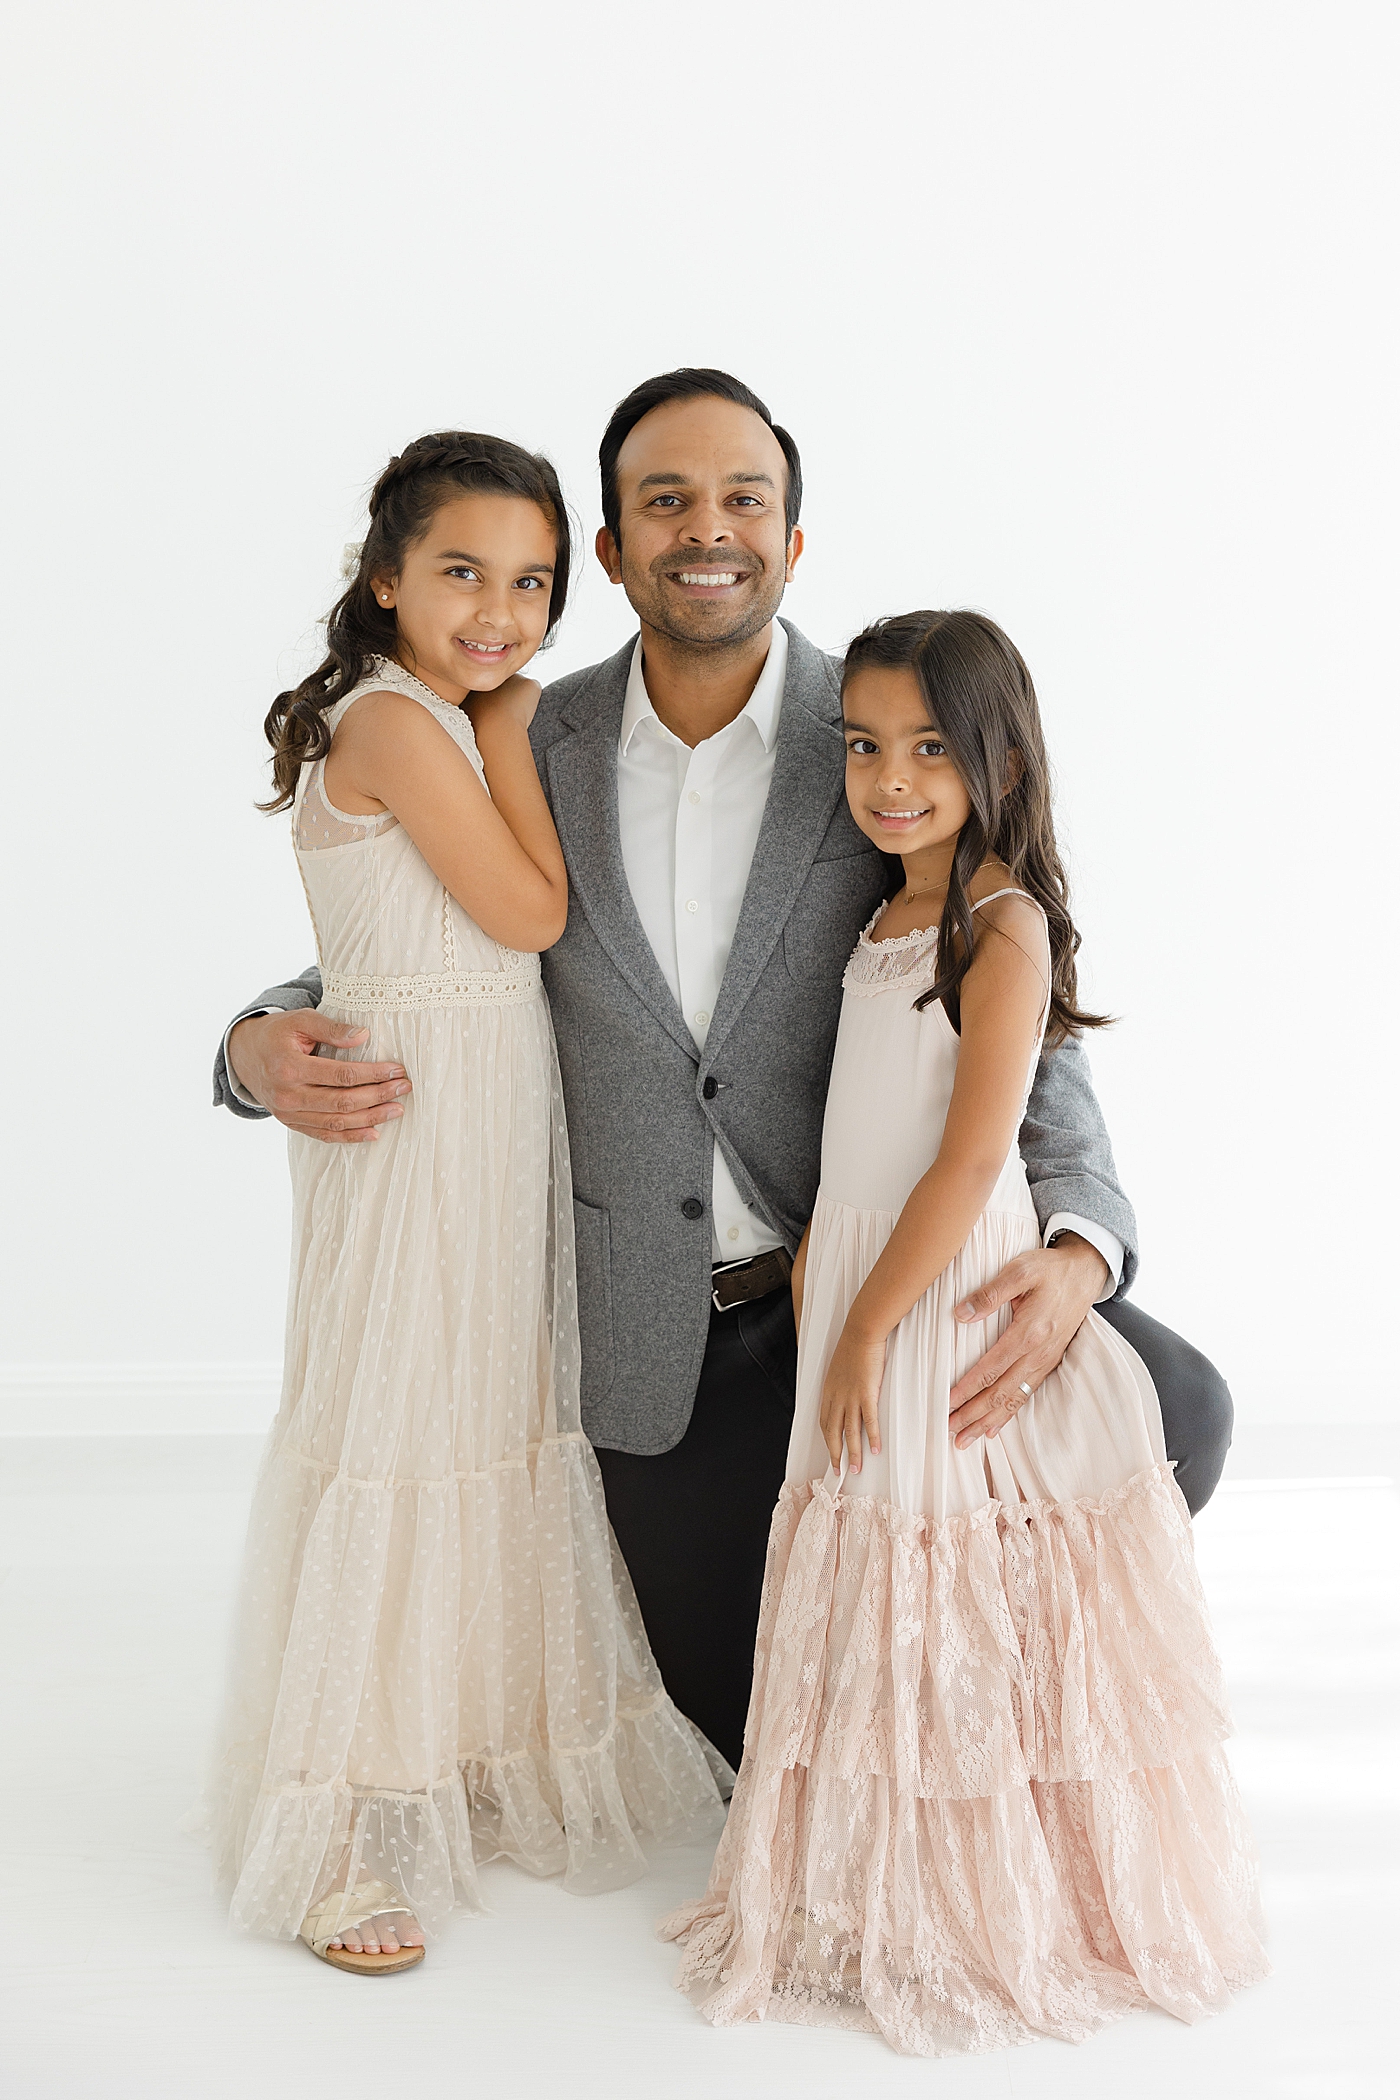 Dad with his two daughters in the studio | Image by Sana Ahmed Photography